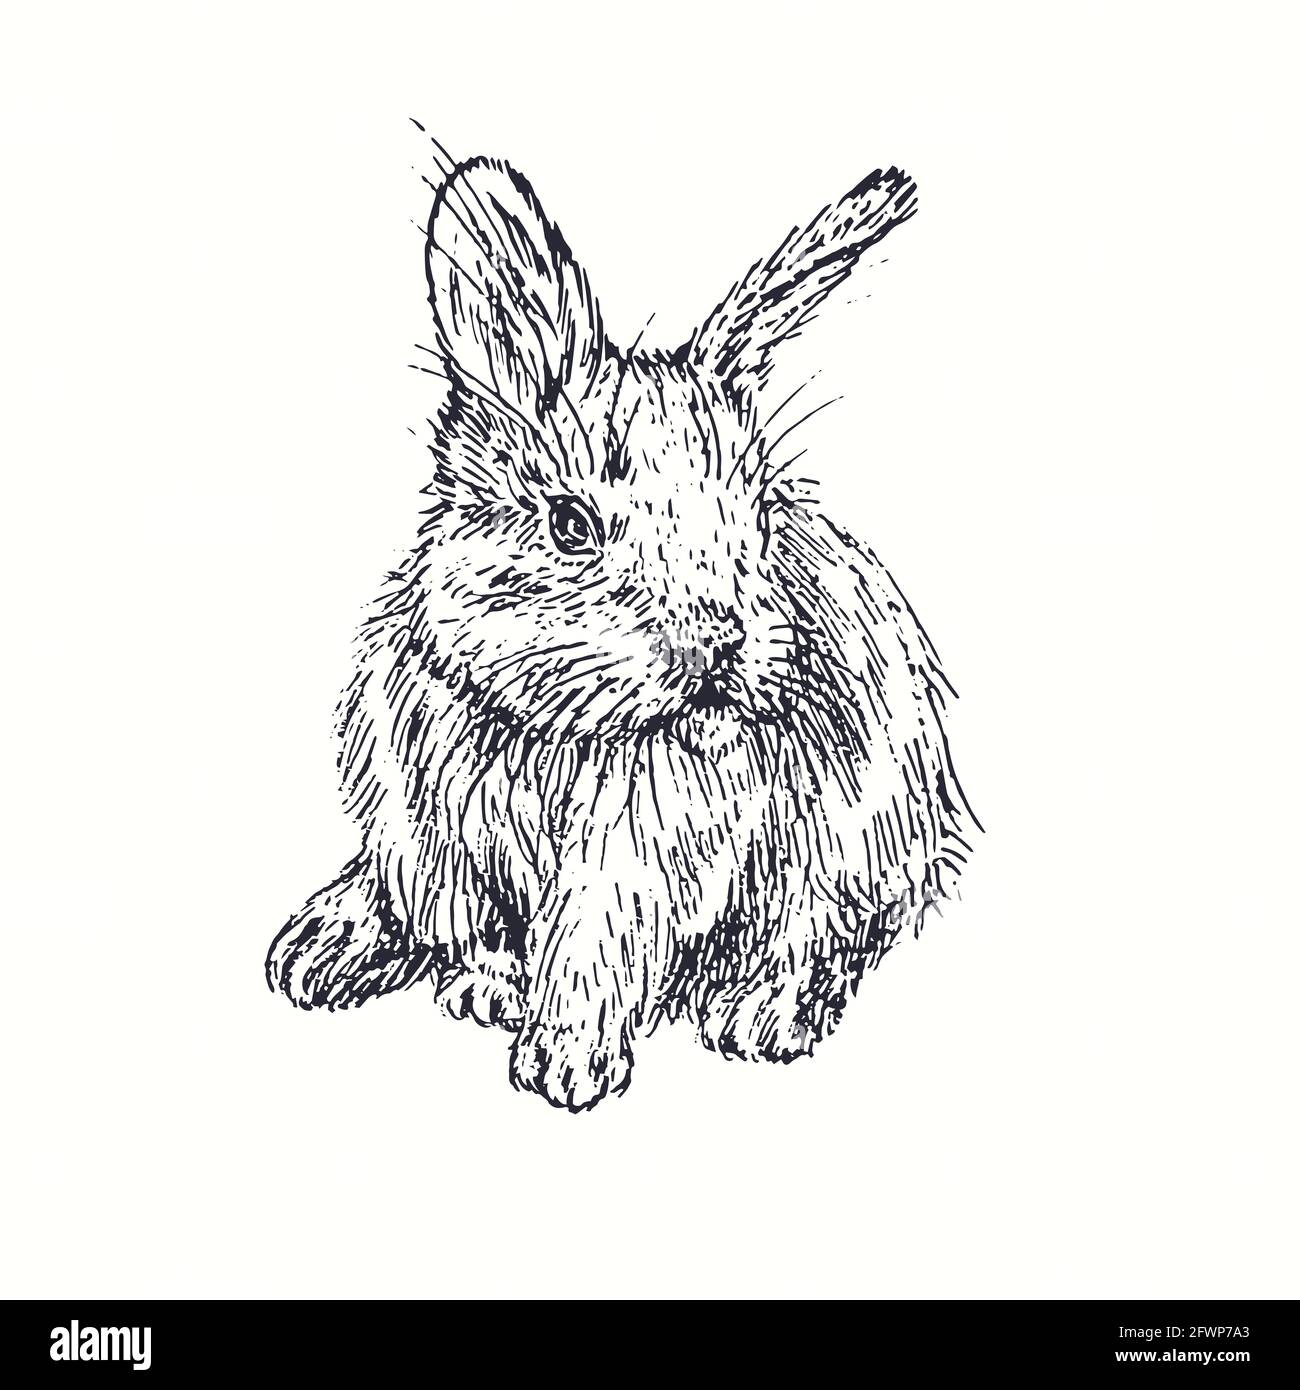 Rabbit (hare) sitting front view. Ink black and white doodle drawing in woodcut style. Stock Photo